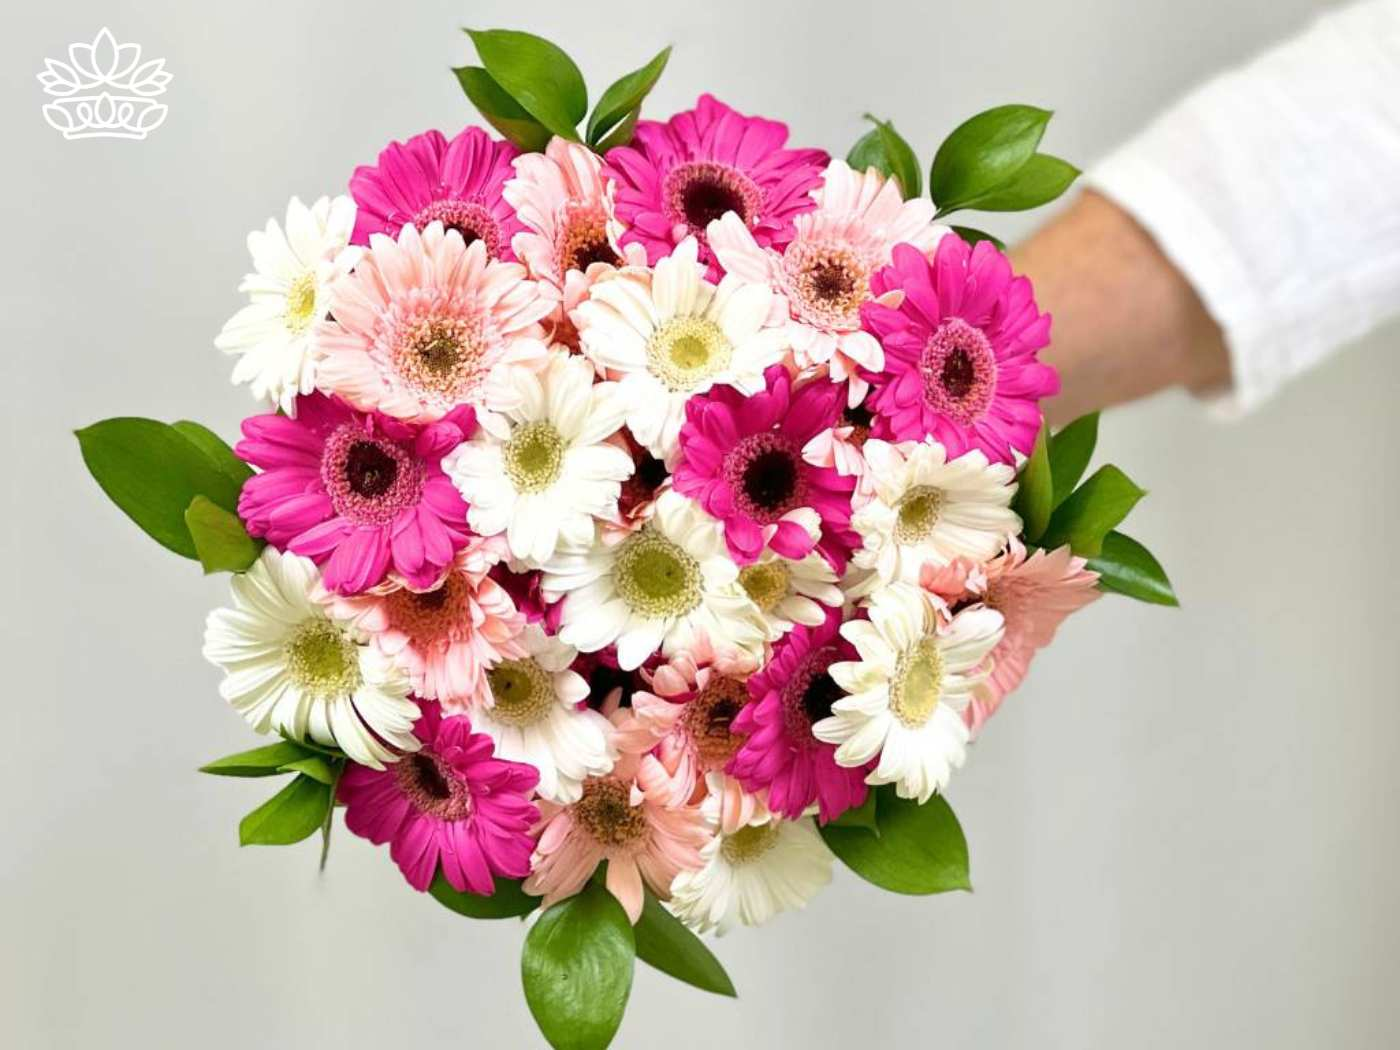 A bouquet of pink, white, and light peach Gerbera daisies, complemented by green foliage and held by a person in a white sleeve. Fabulous Flowers and Gifts. Gerberas Collection. Delivered with Heart.